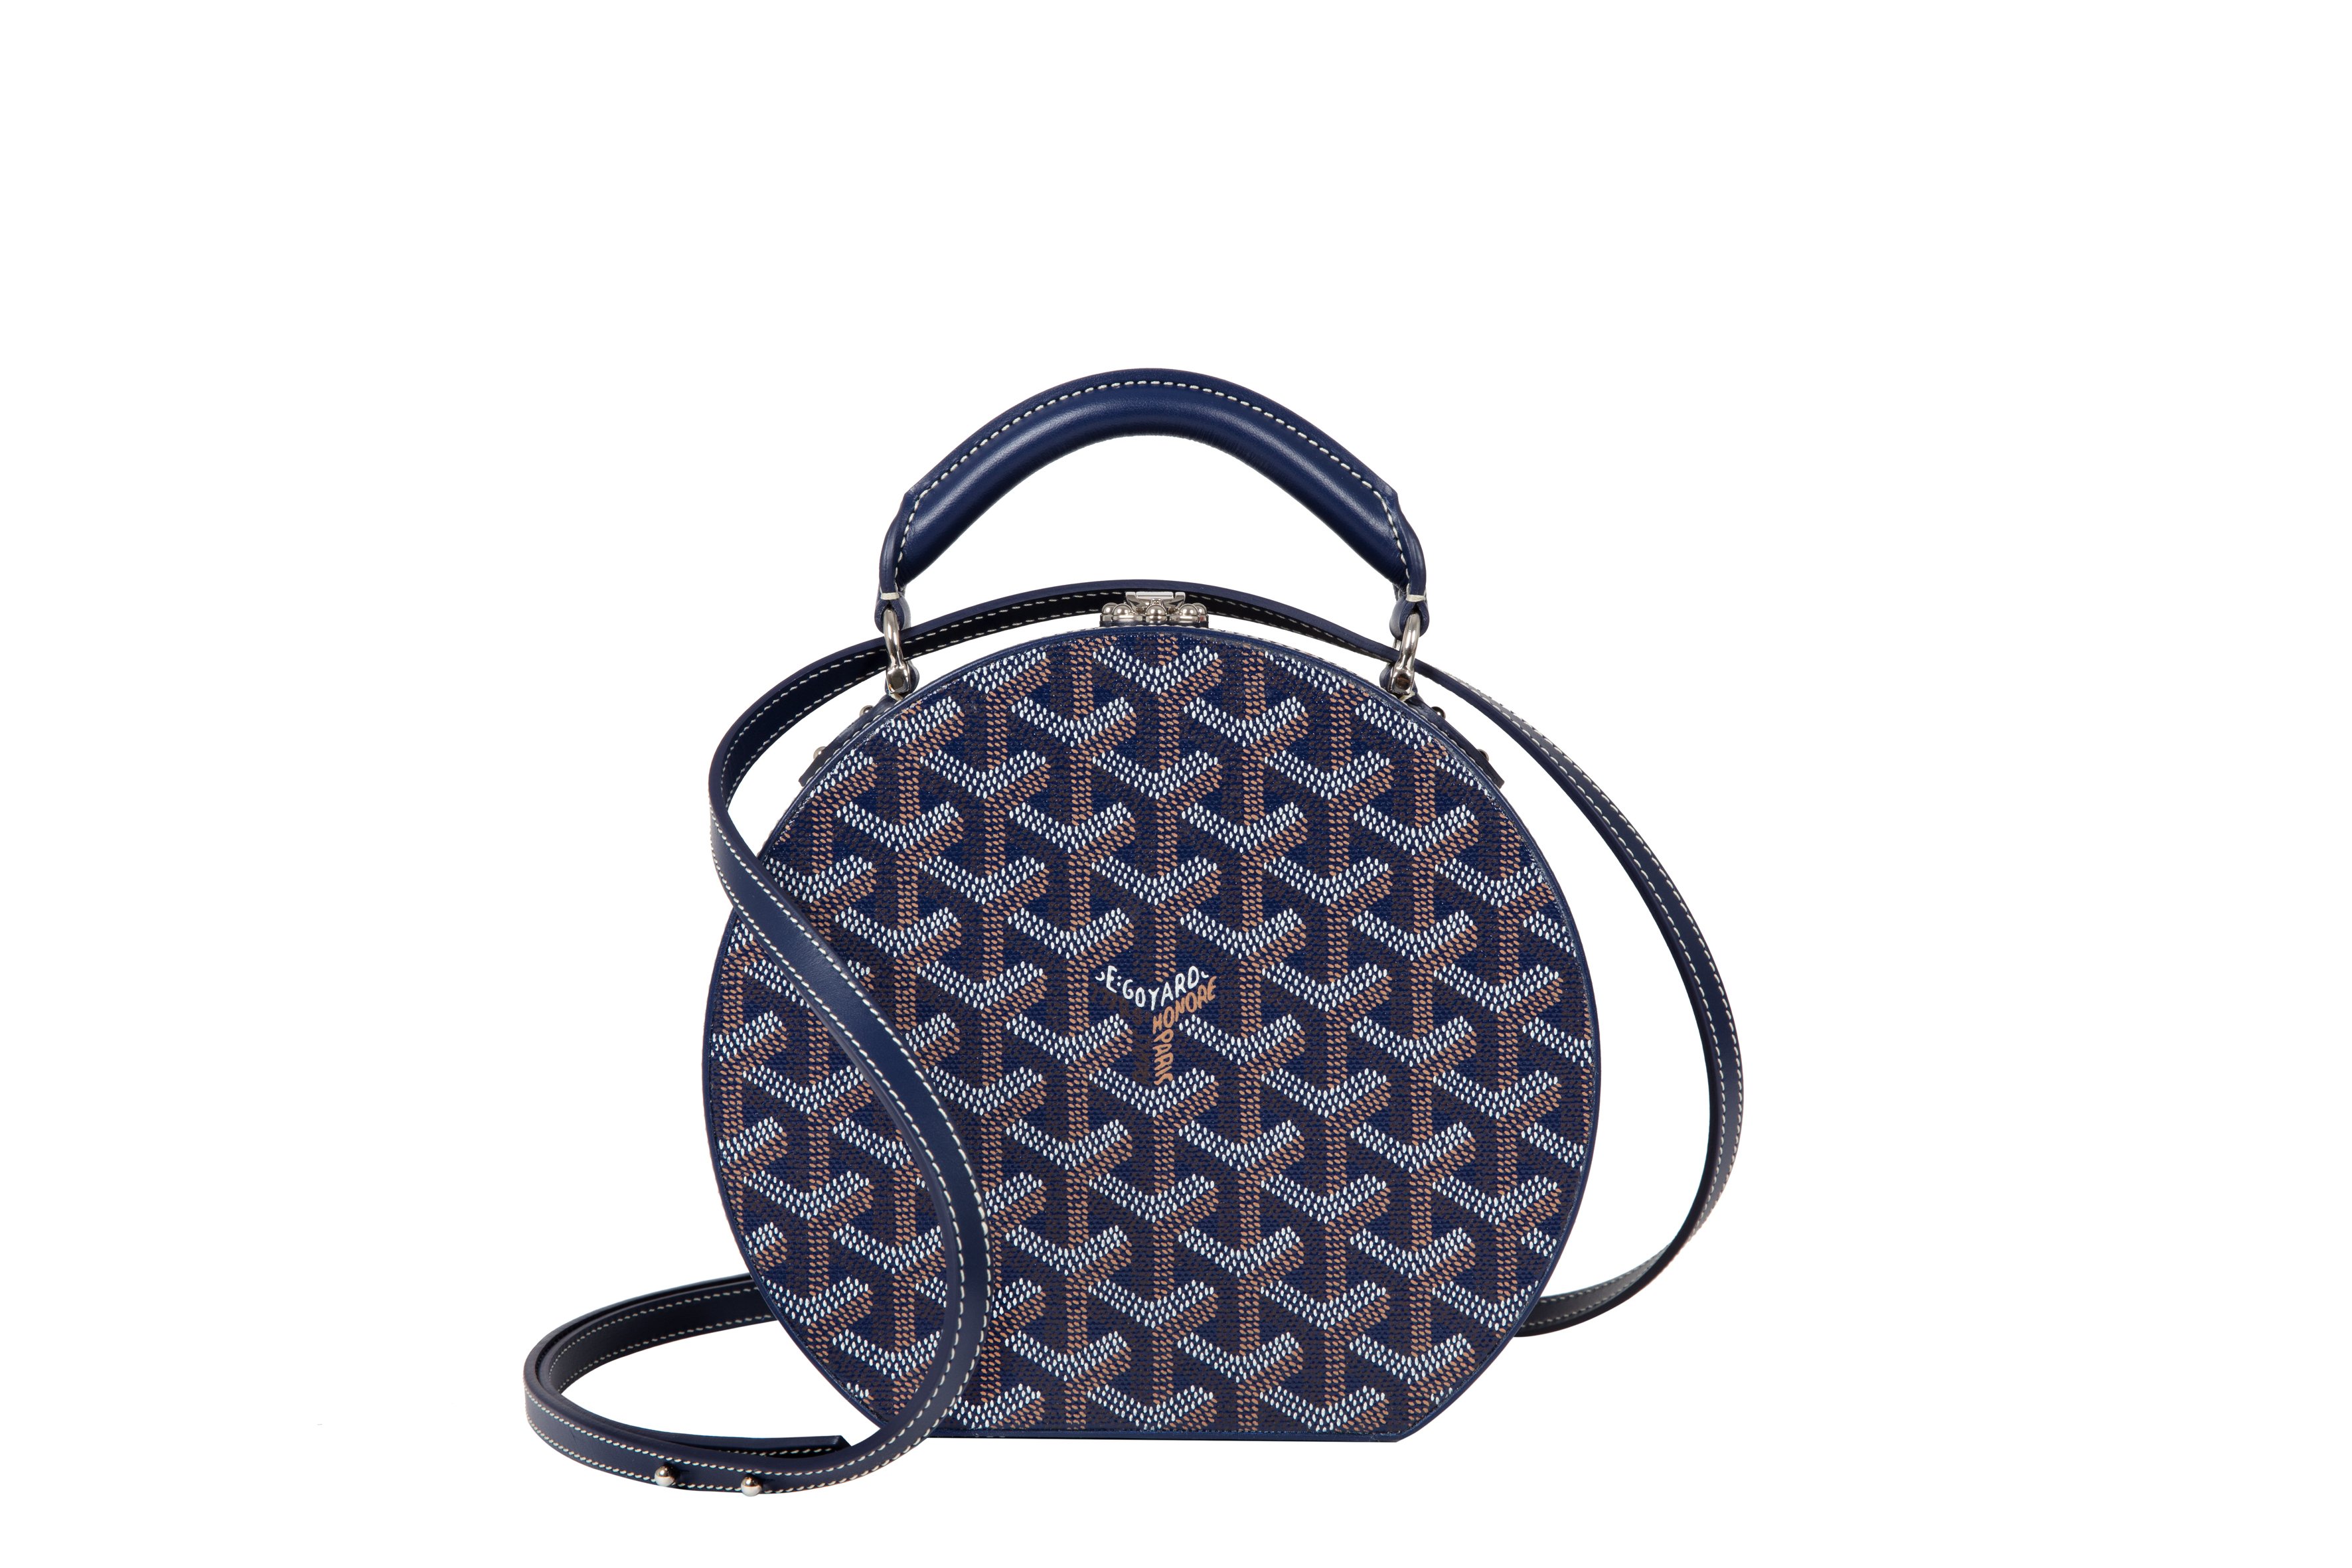 GoyardOfficial on X: Timeless allure or contemporary flair: the Vendôme  bags in PM & Mini sizes are style chameleons with versatility at heart # goyard #sogoyard #timelessstyle #timelesscrafsmanship  #thevendomebagbygoyard  / X